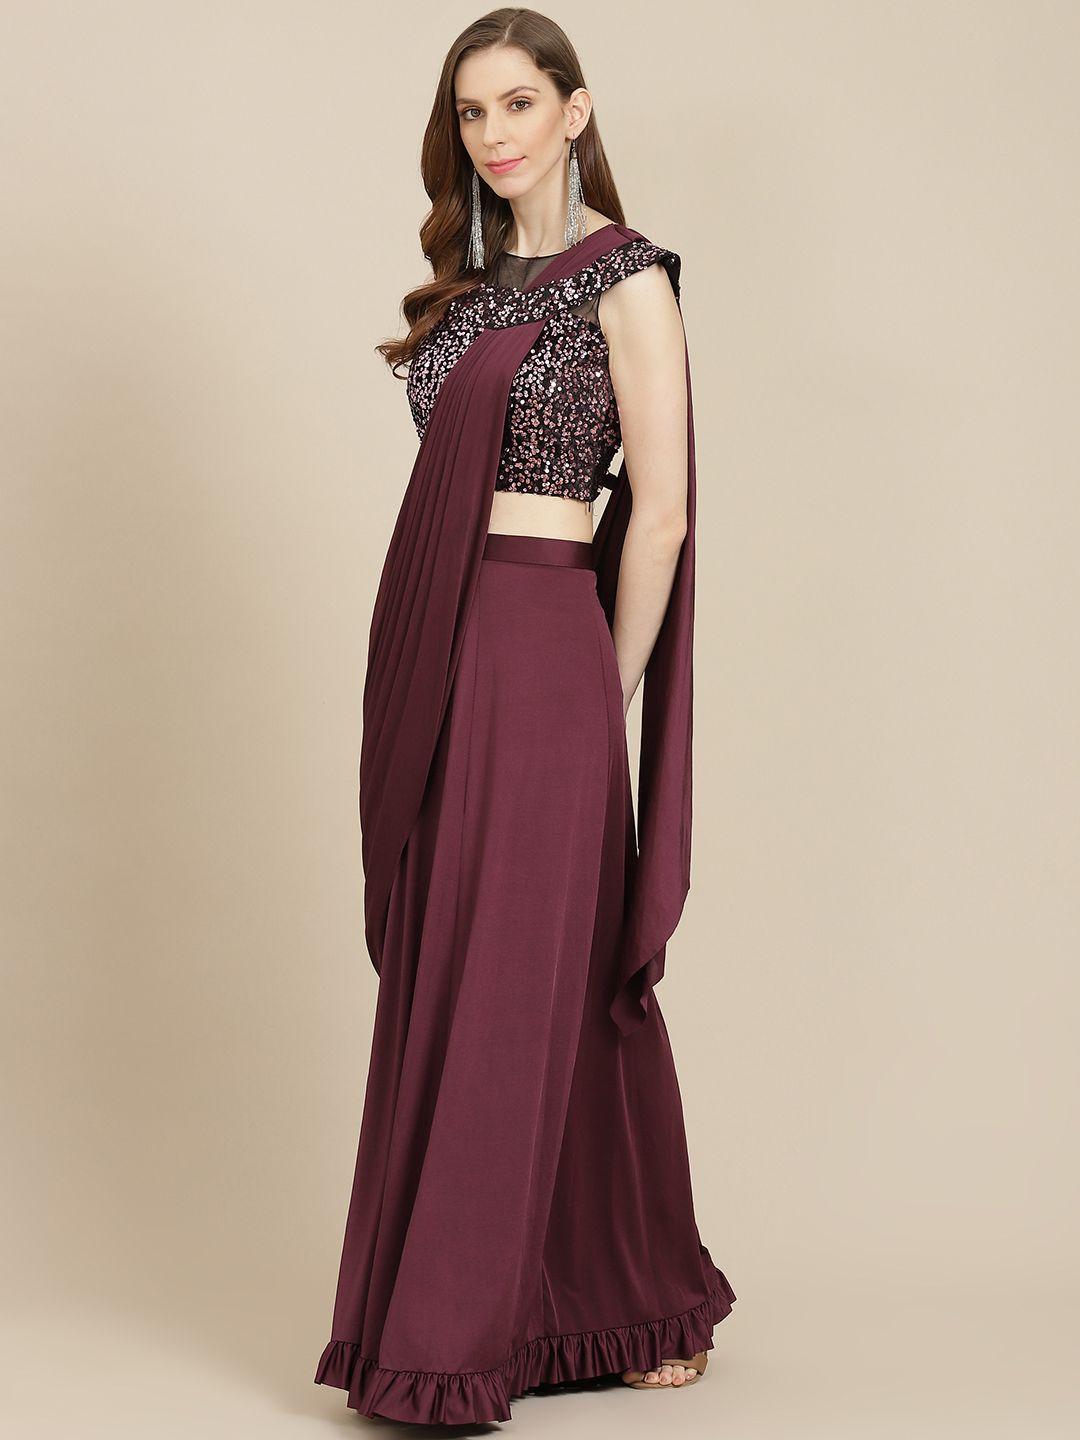 grancy burgundy solid ready to wear skirt saree